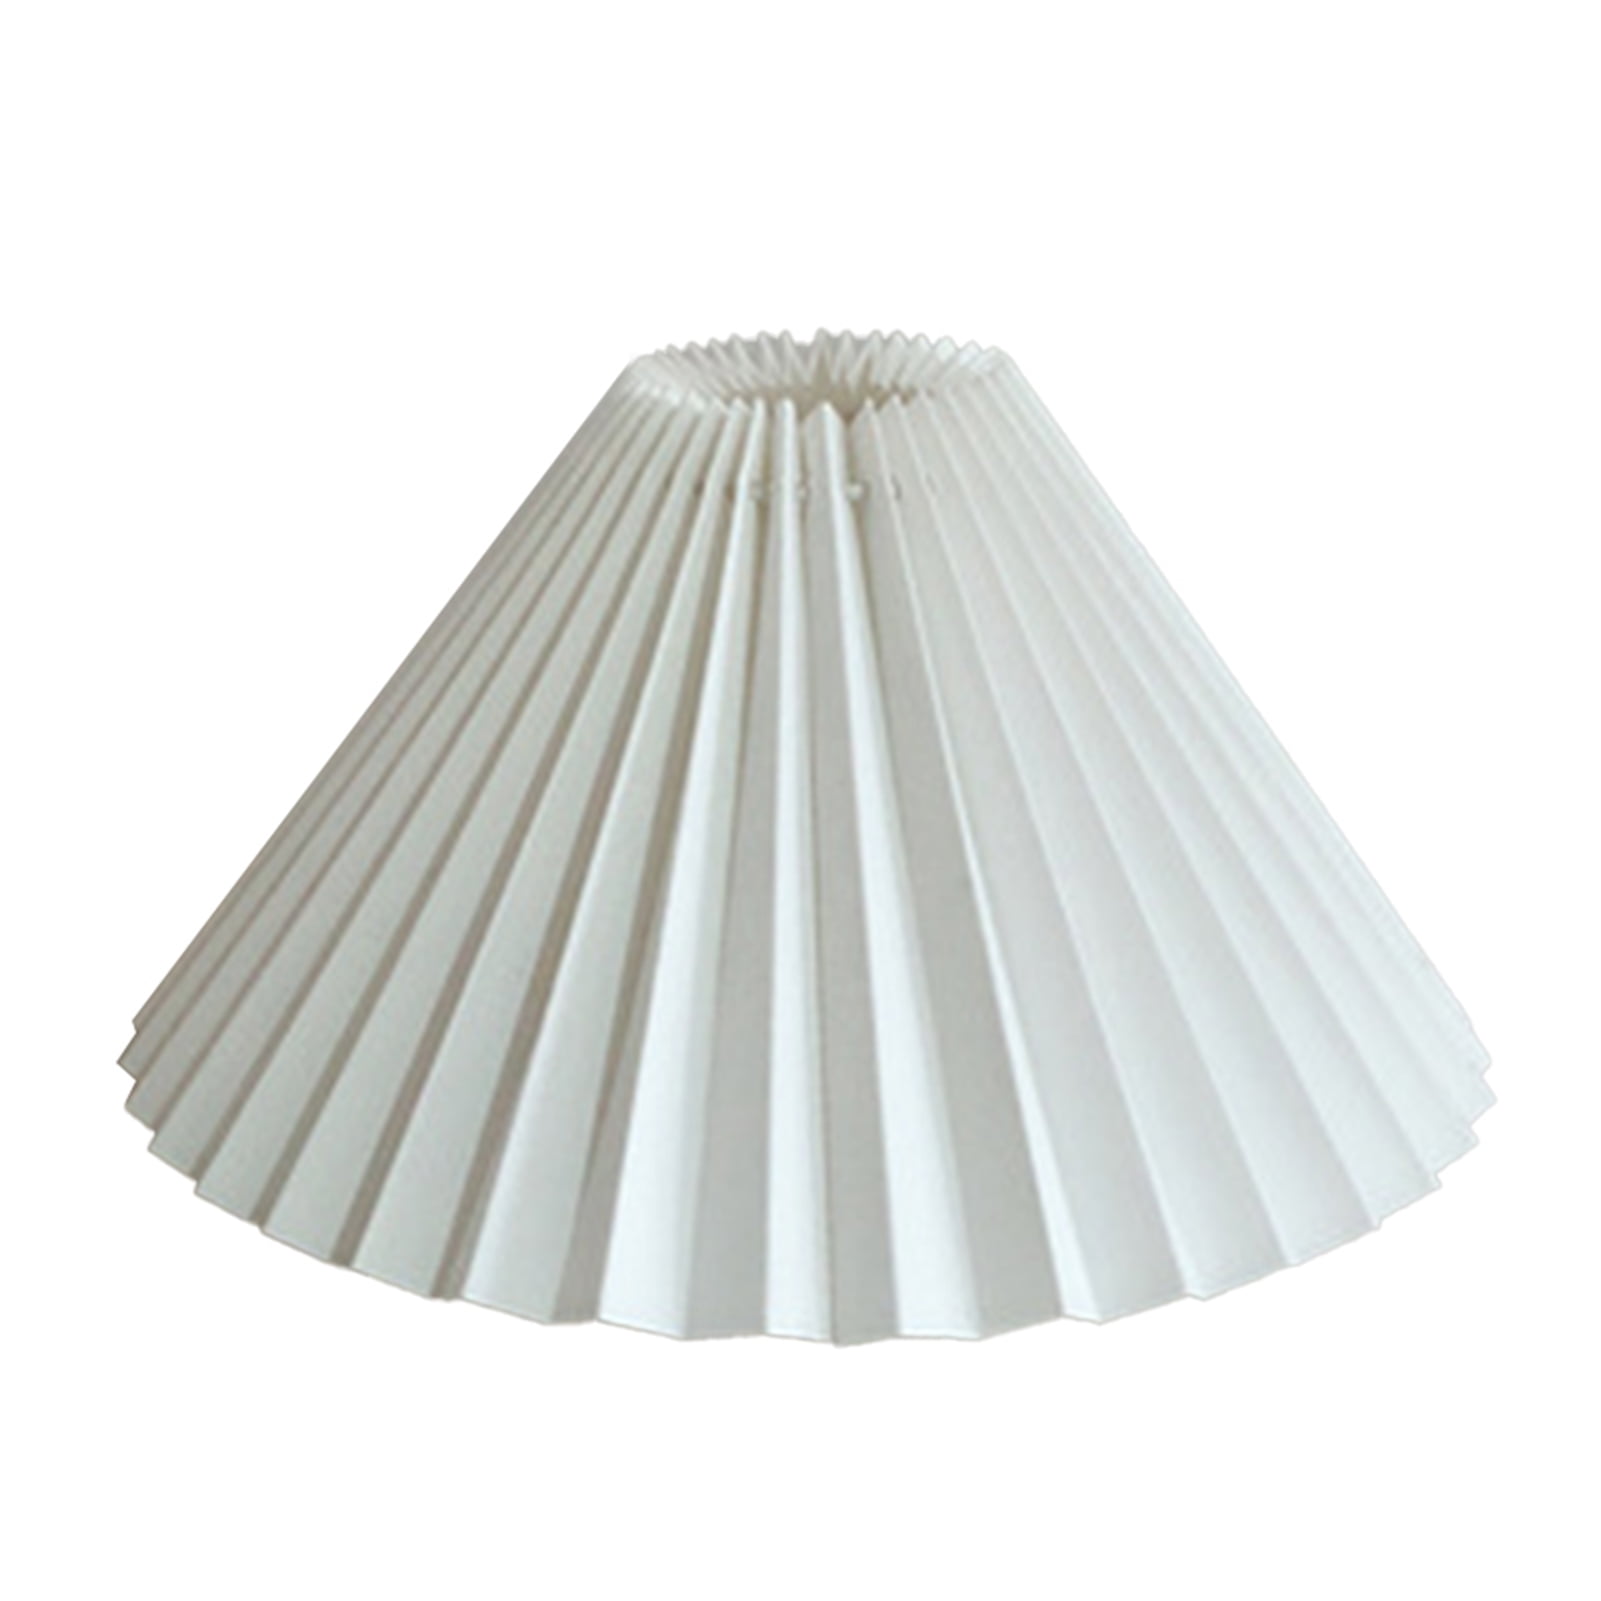 Details about   Pleated White Light Lampshade Cover Japanese Style Fabric Table Ceiling 25-45cm✅ 